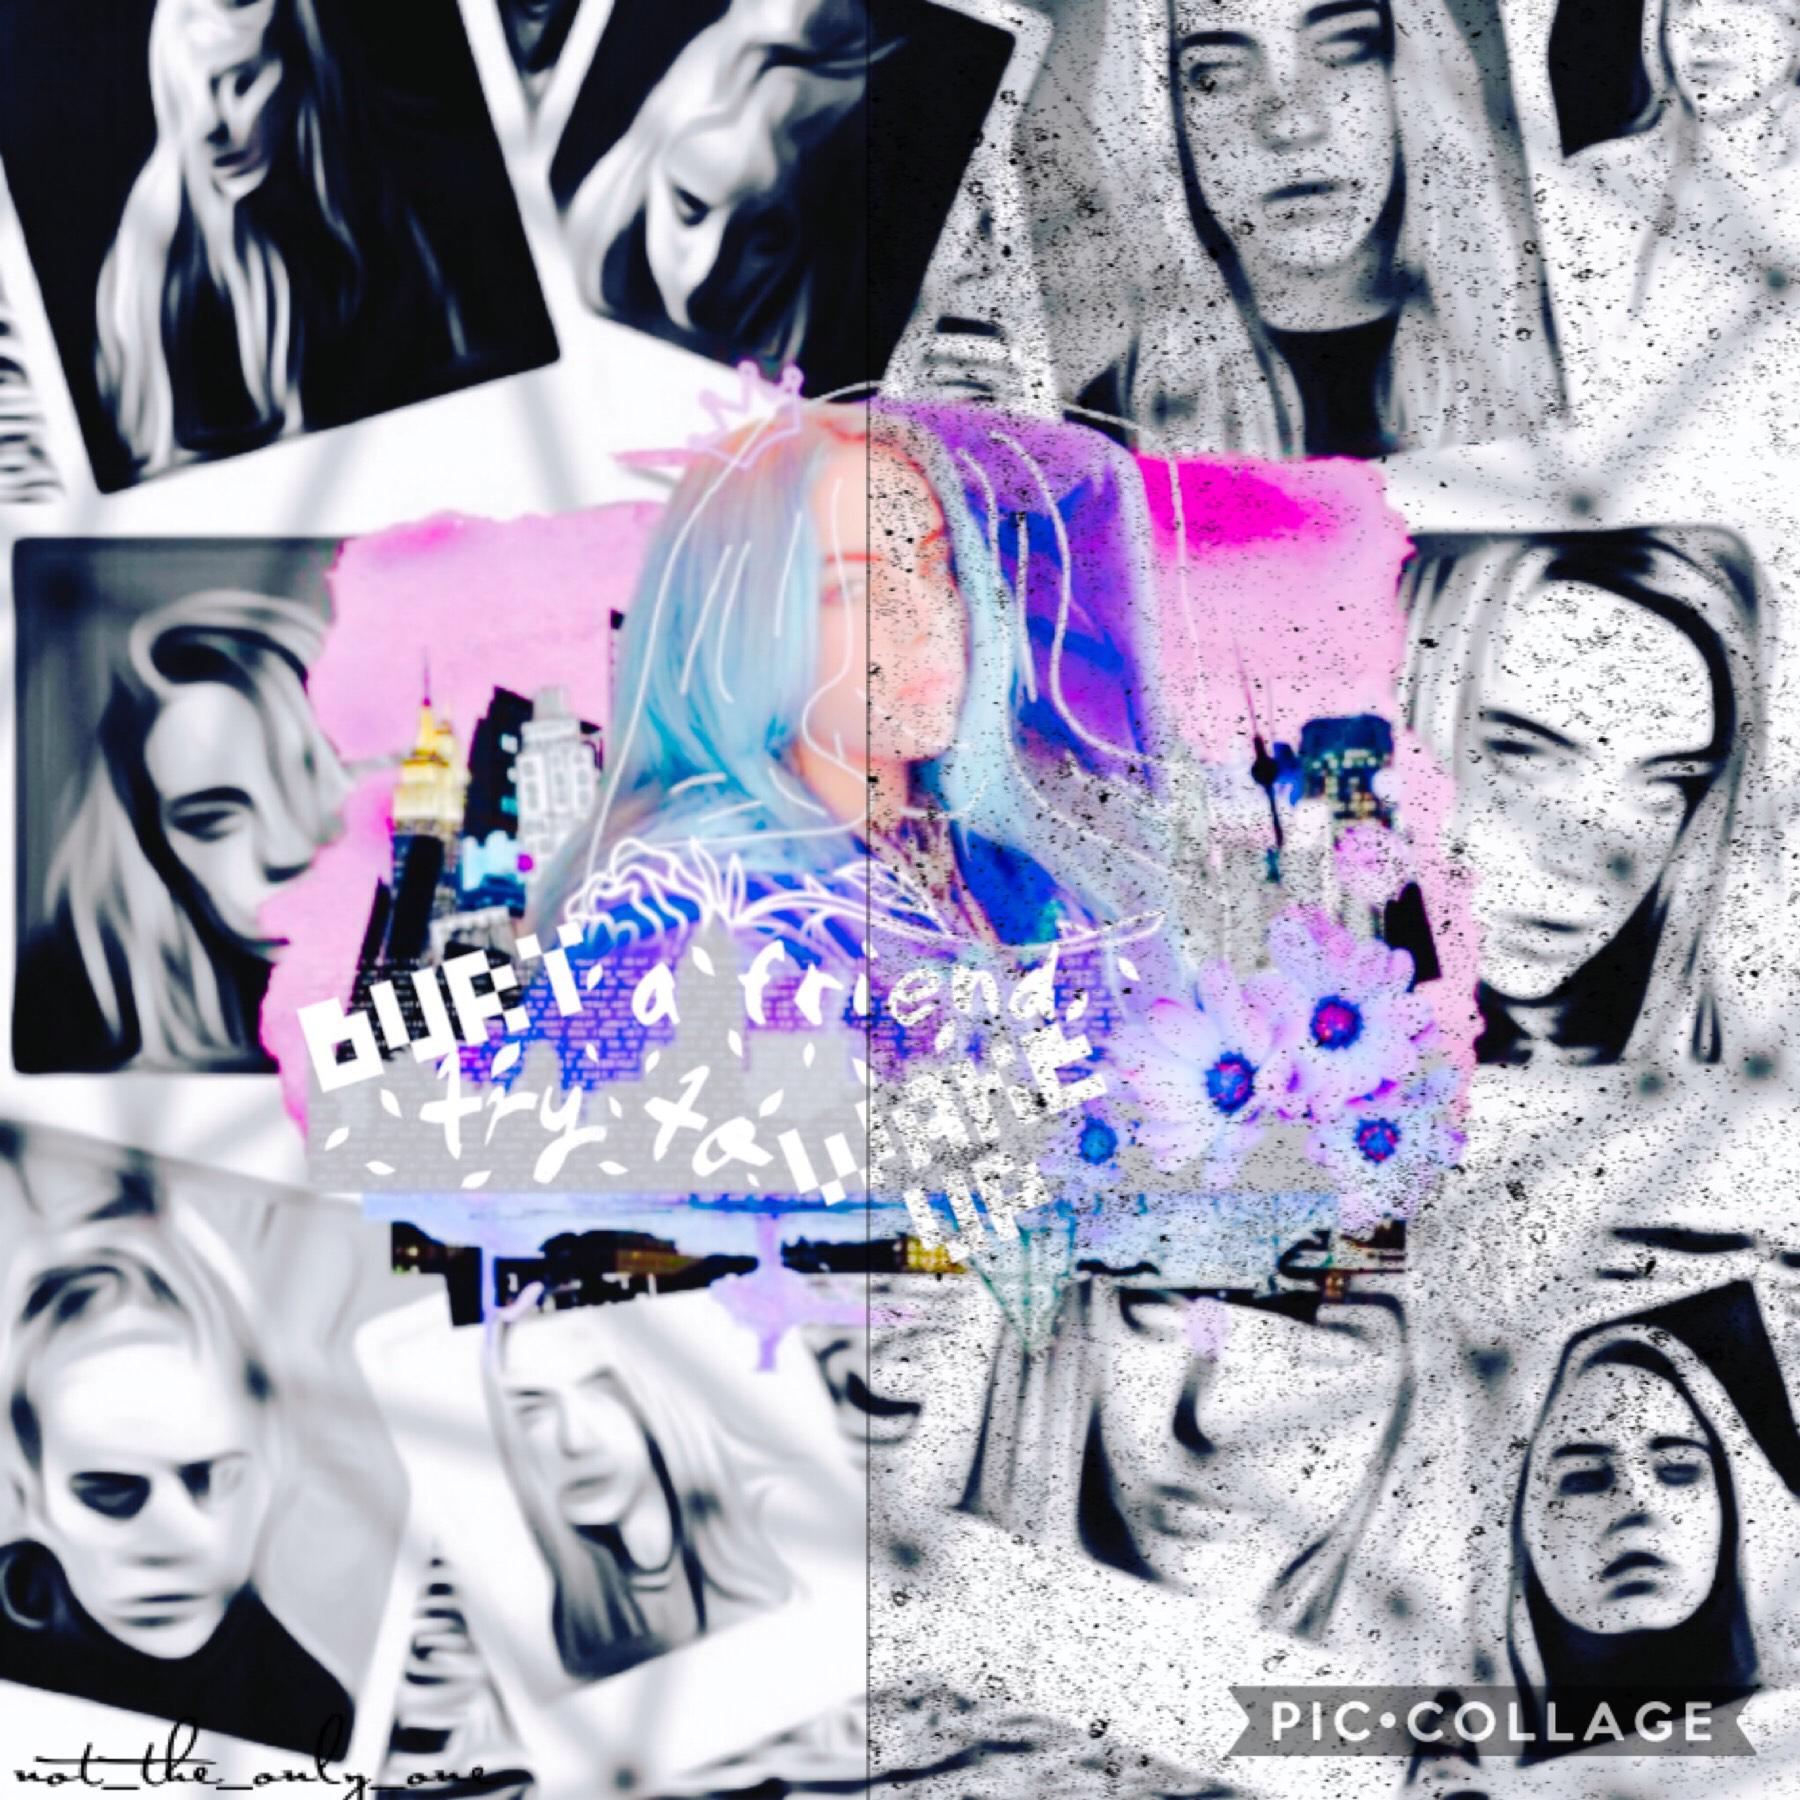 tap the 🐔
loooove billie's new song "bury a friend" comment below what u think of the song and this collage!!😏🌺🥰😜😍